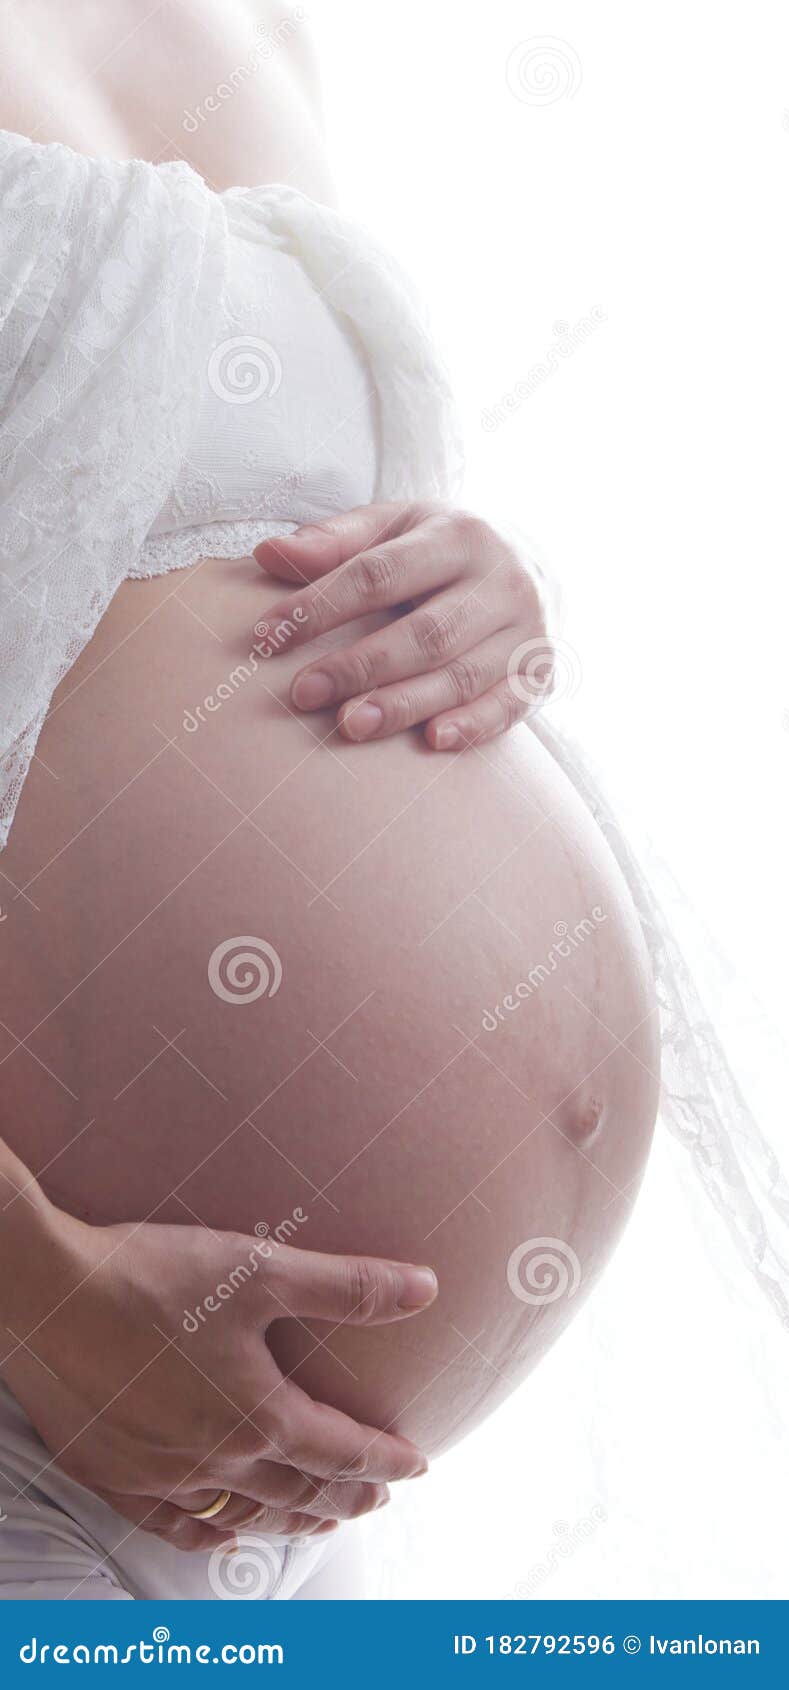 The womb of pregnant woman stock photo. Image of philippines - 182792596